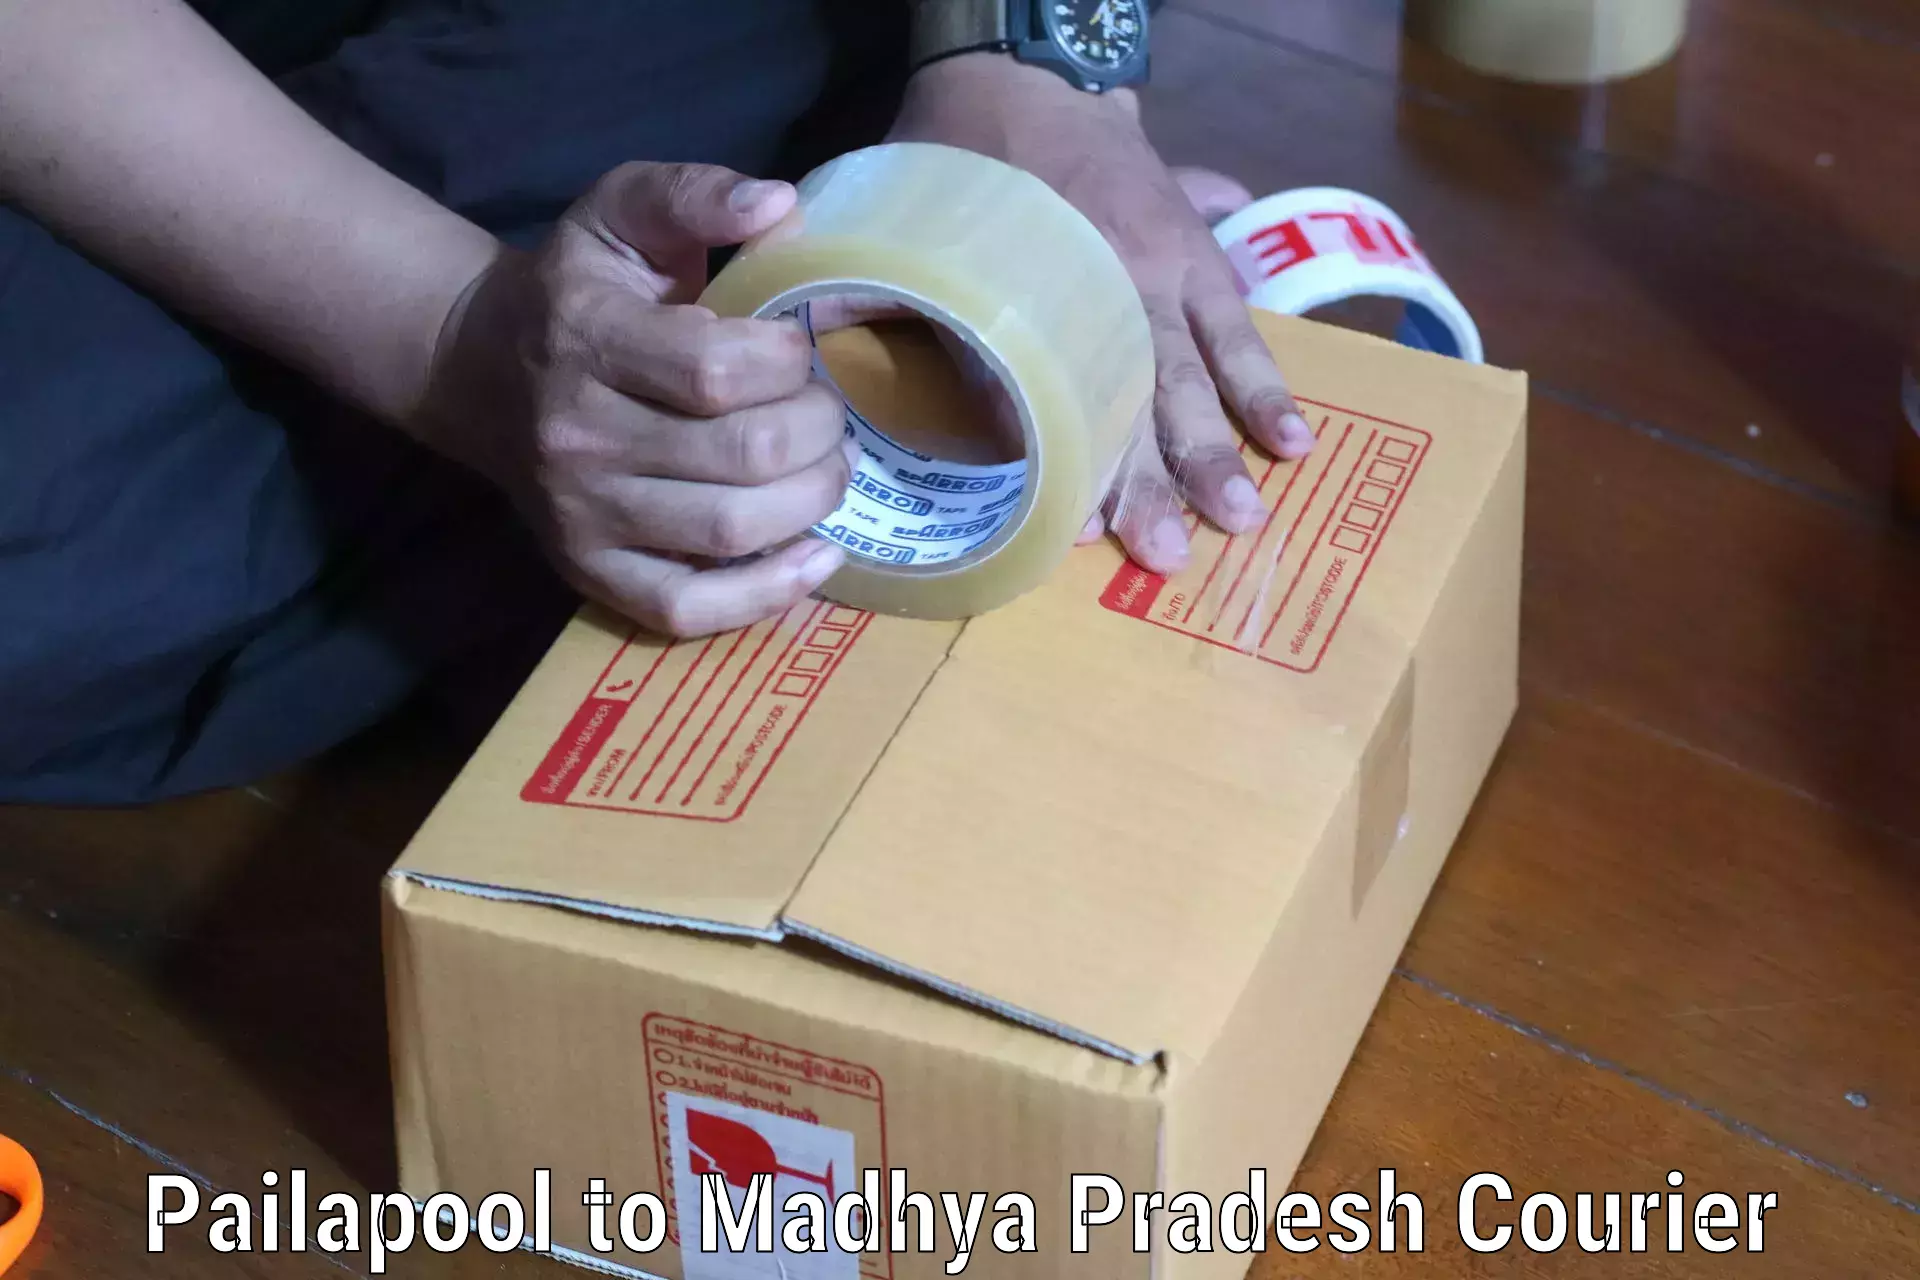 Global courier networks Pailapool to Madhya Pradesh